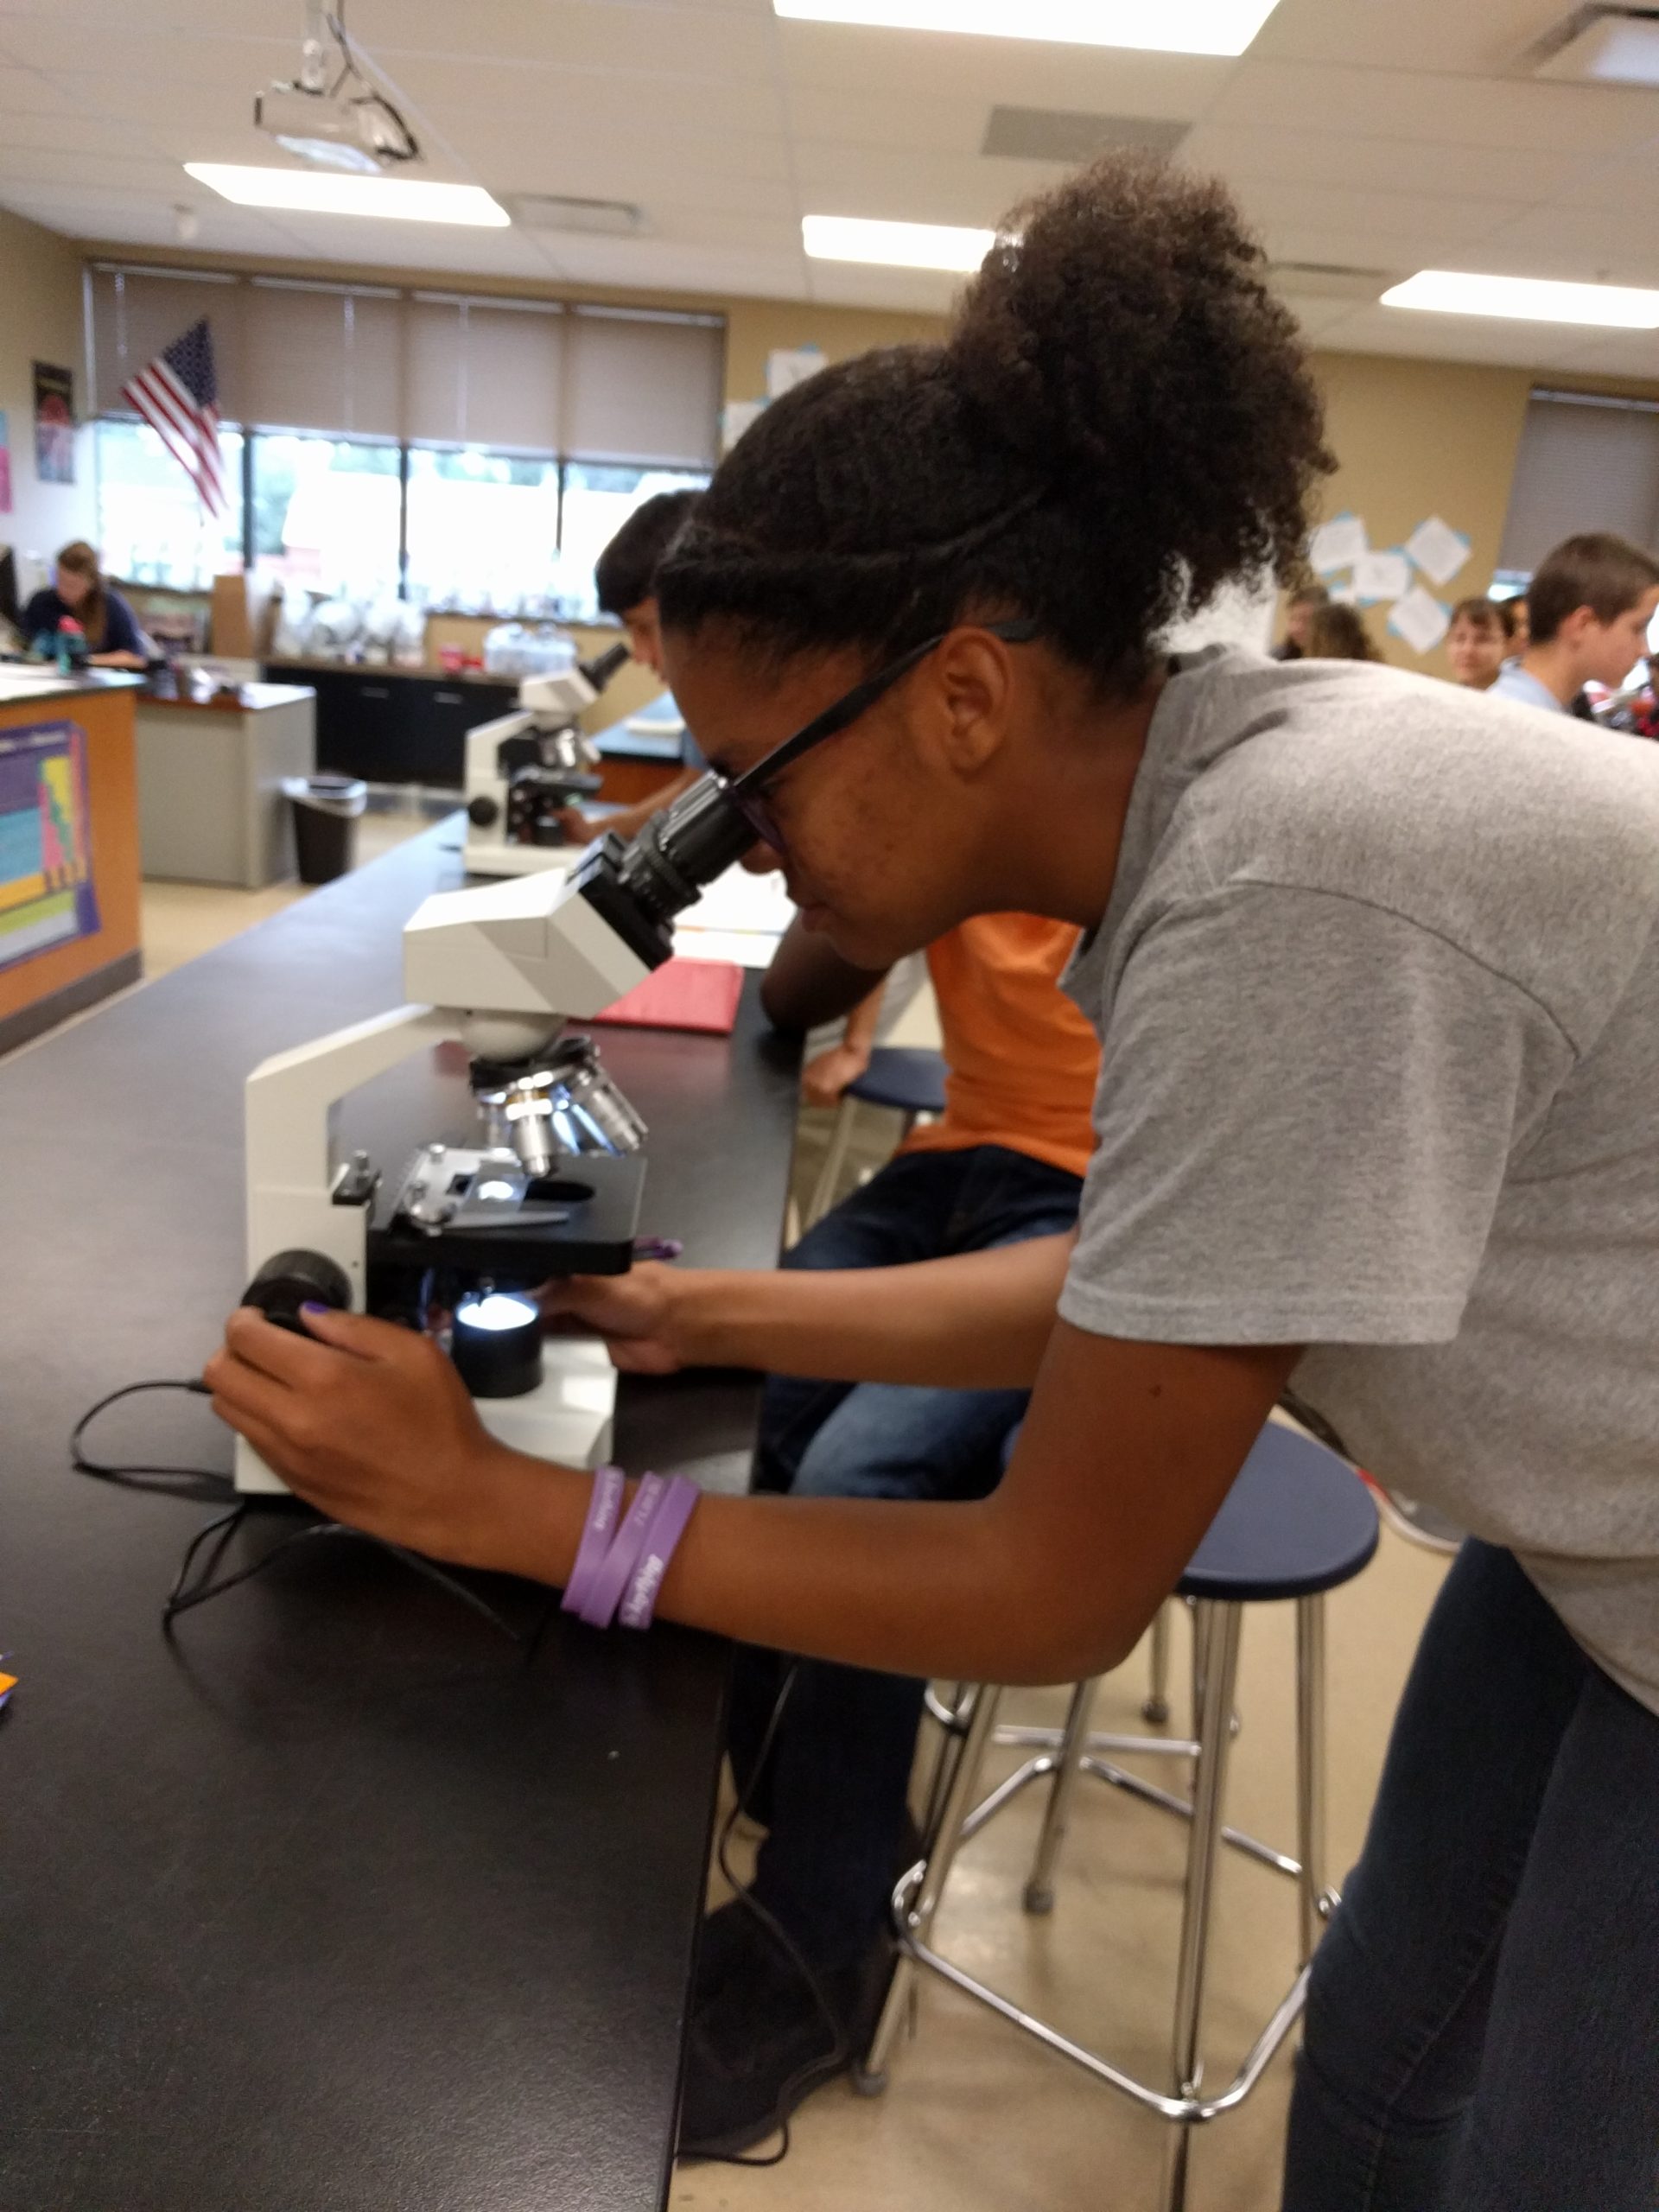 A Vanguard student using a microscope in science lab